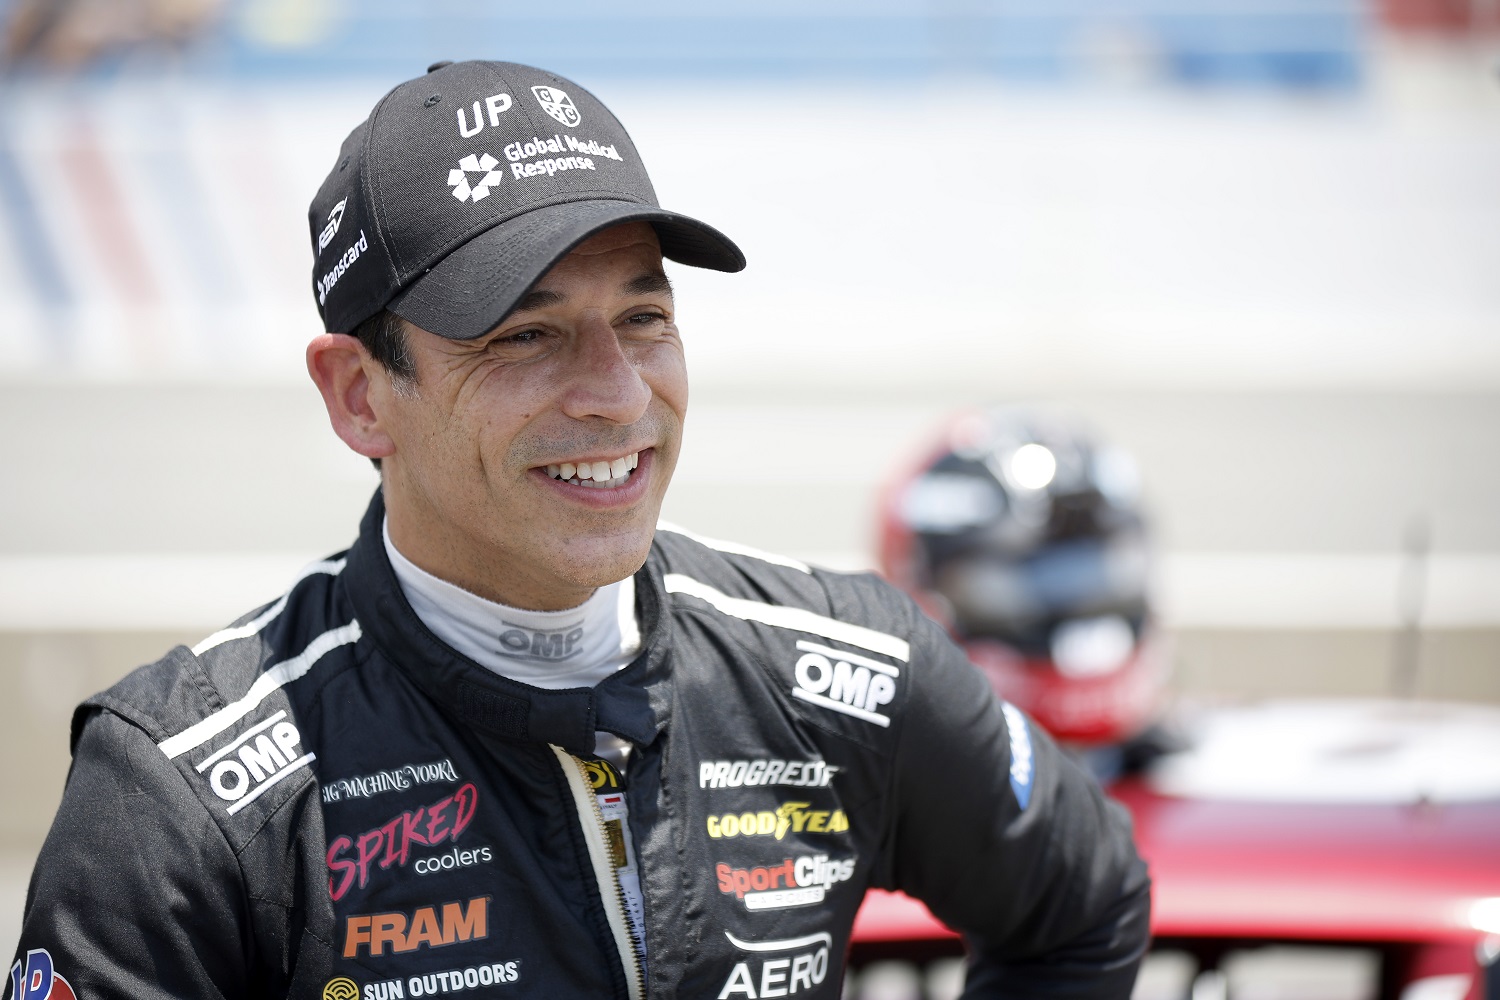 Helio Castroneves on the grid during practice for the Superstar Racing Experience event at South Boston Speedway on June 25, 2022 in South Boston, Virginia. | Jared Tilton/SRX/Getty Images